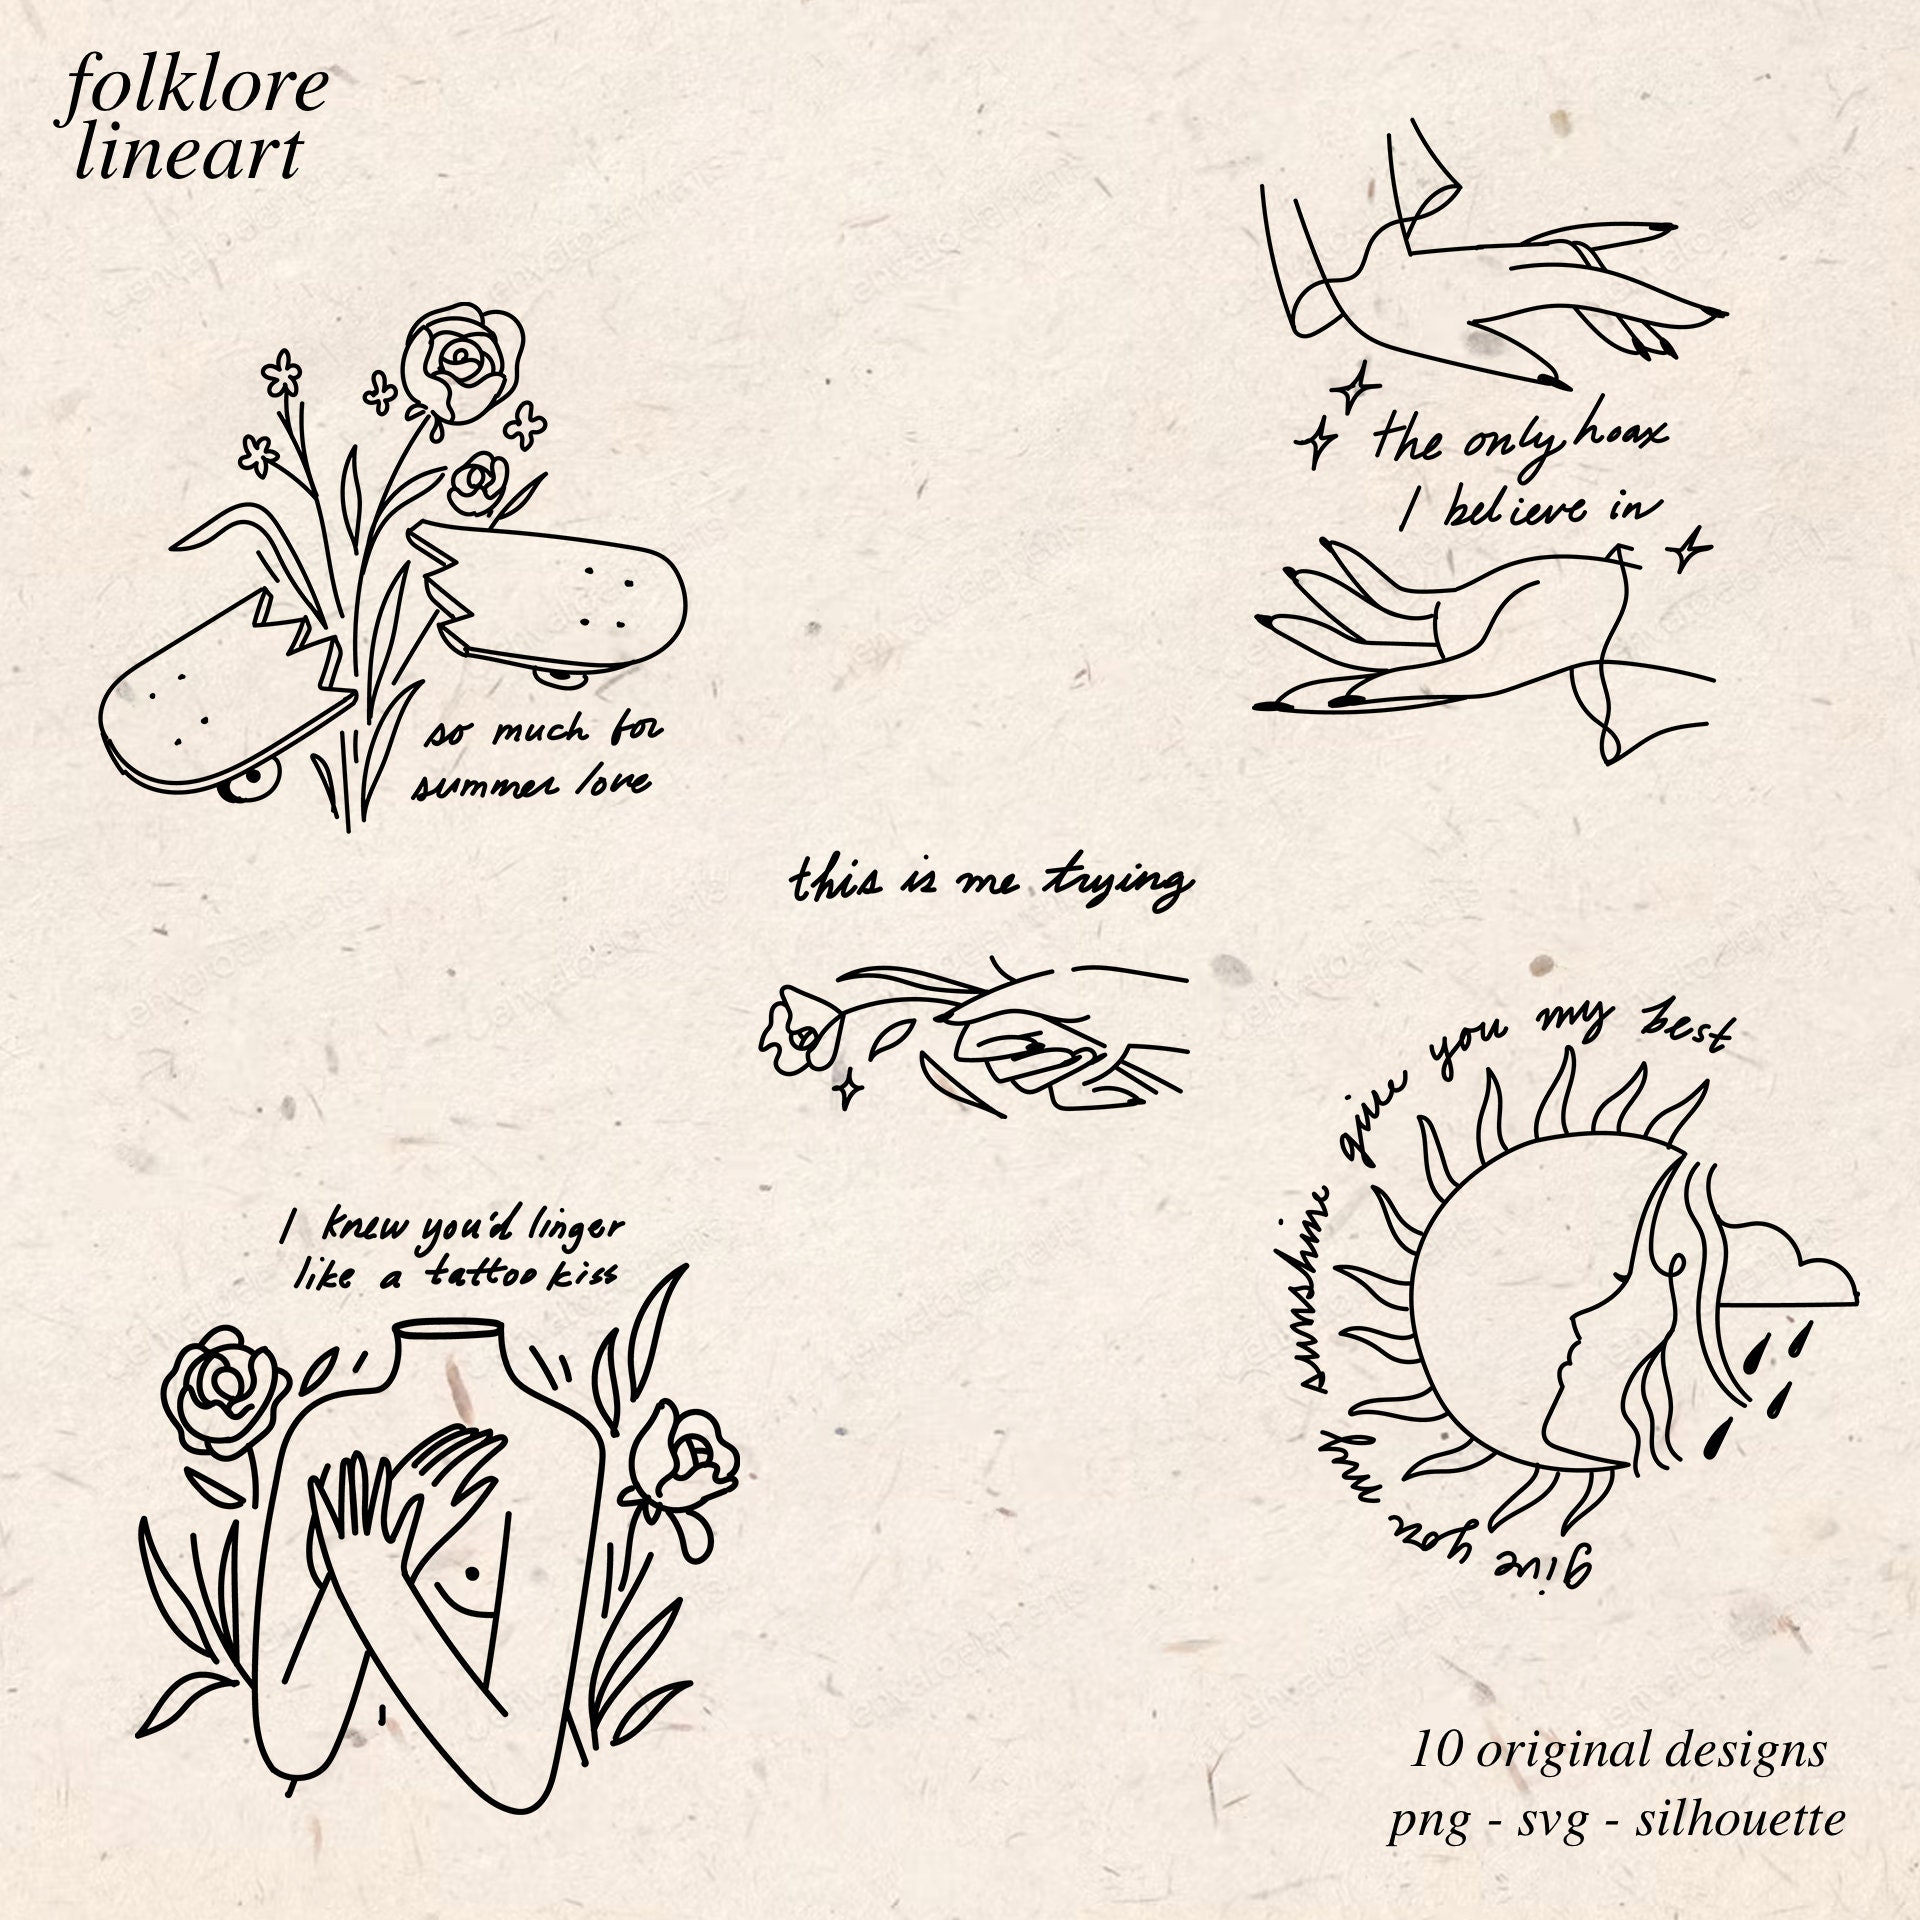 chan  on Twitter dont be sad go get a folklore tattoo dont be sad go  get a folklore tattoo dont be sad go get a folklore tattoo dont be sad go